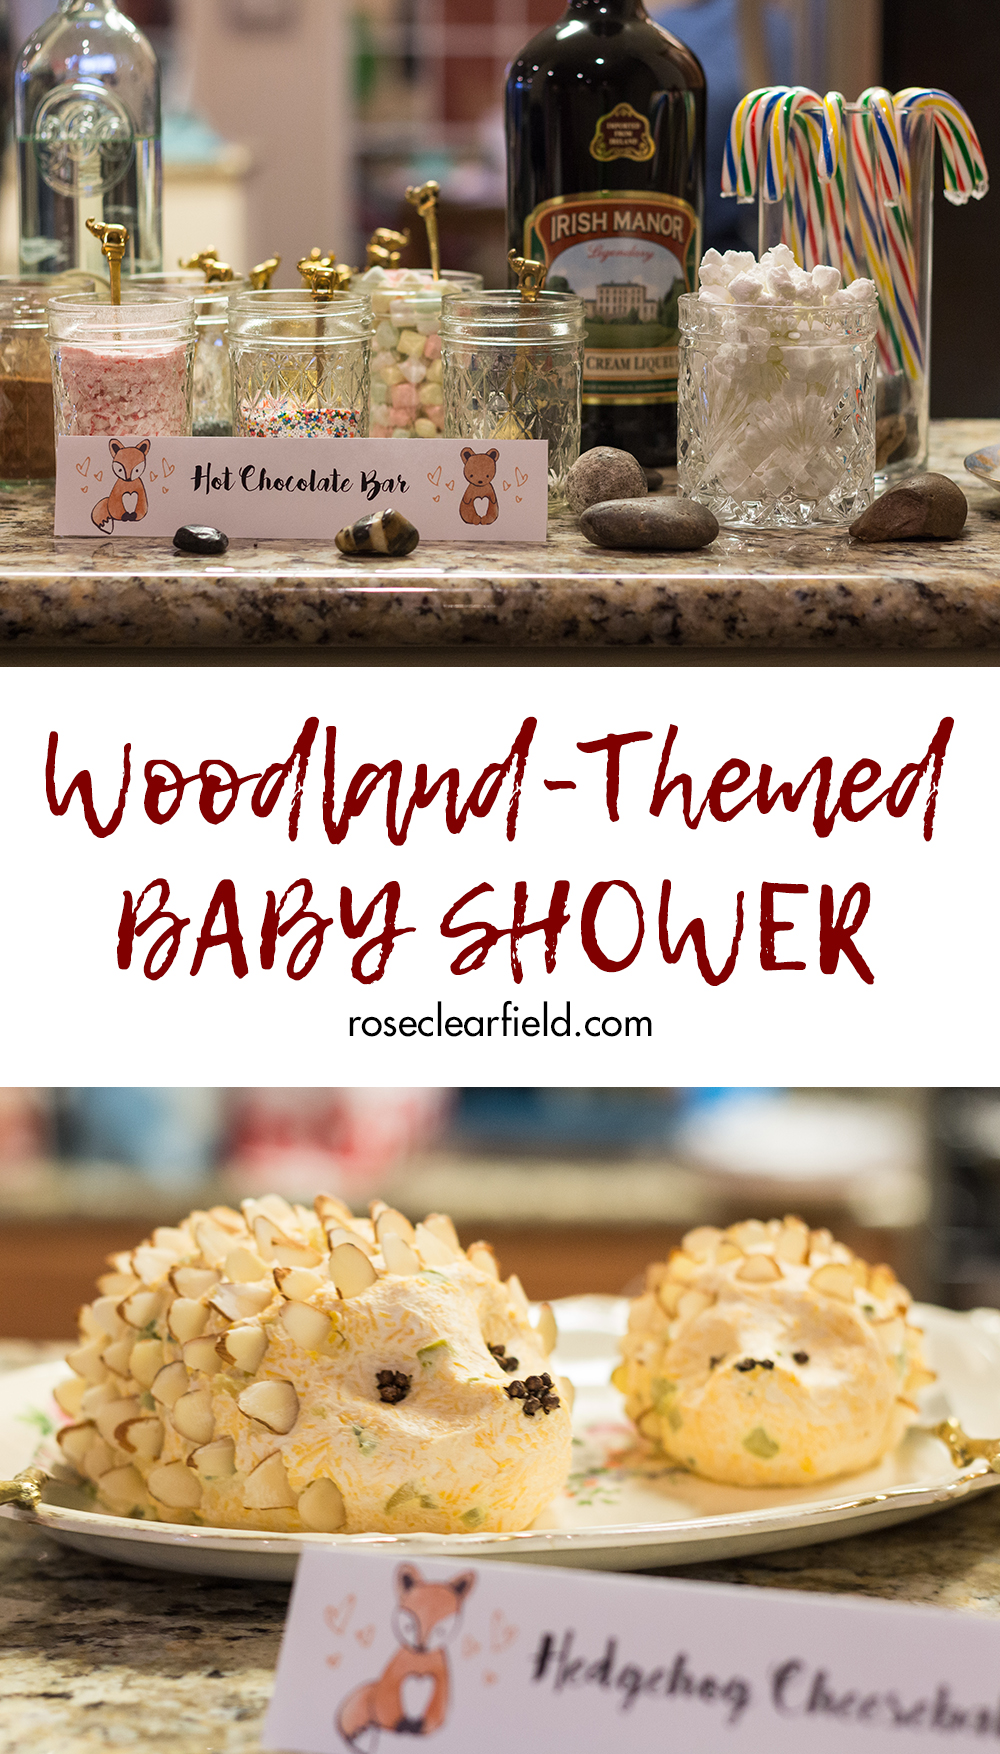 Woodland-themed baby shower. Perfect shower theme for a boy or a girl, any time of the year! #babyshower #woodlandtheme #animalparty | https://www.roseclearfield.com